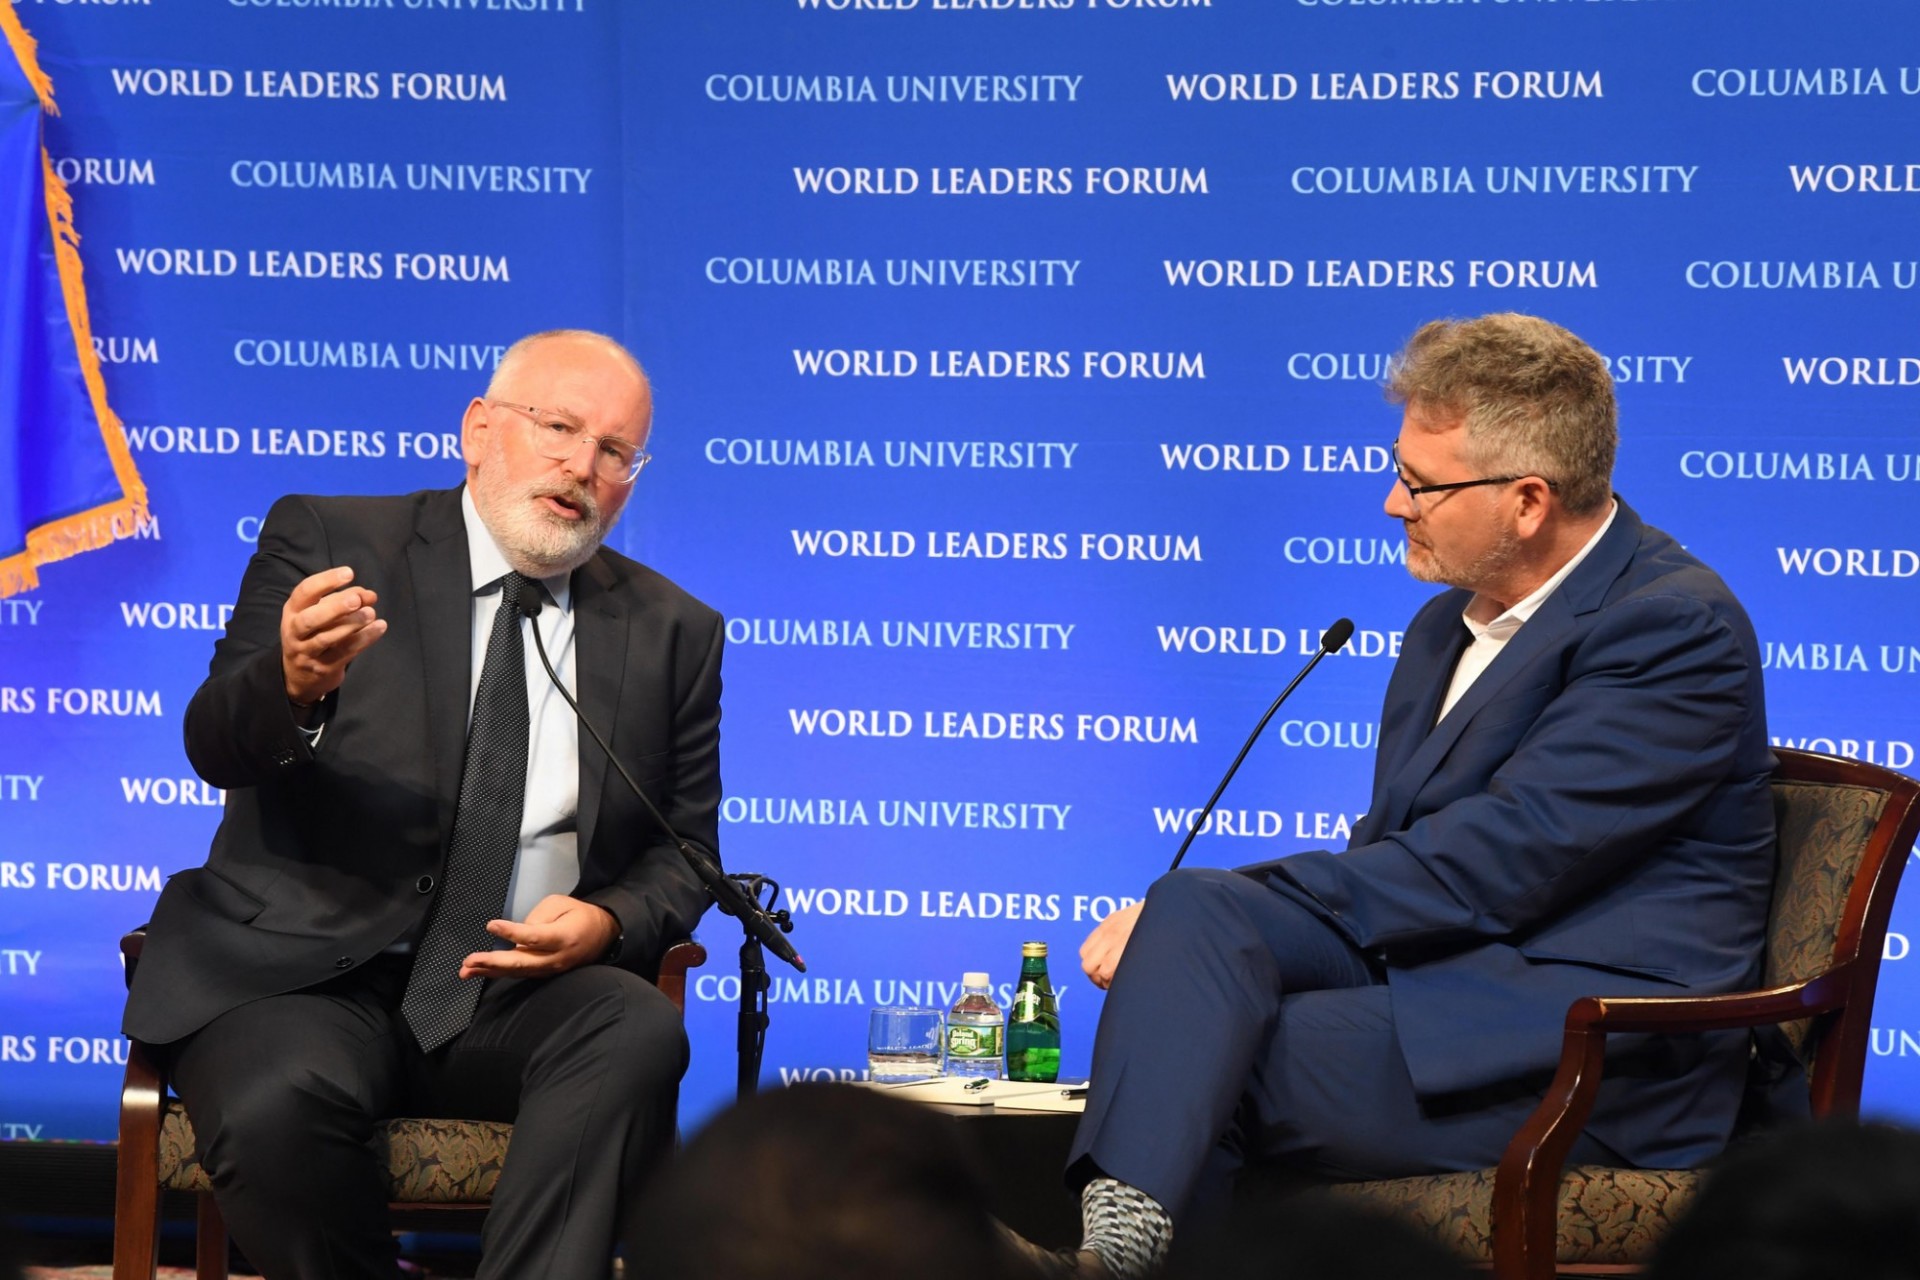 Frans Timmermans in conversation with Adam Tooze